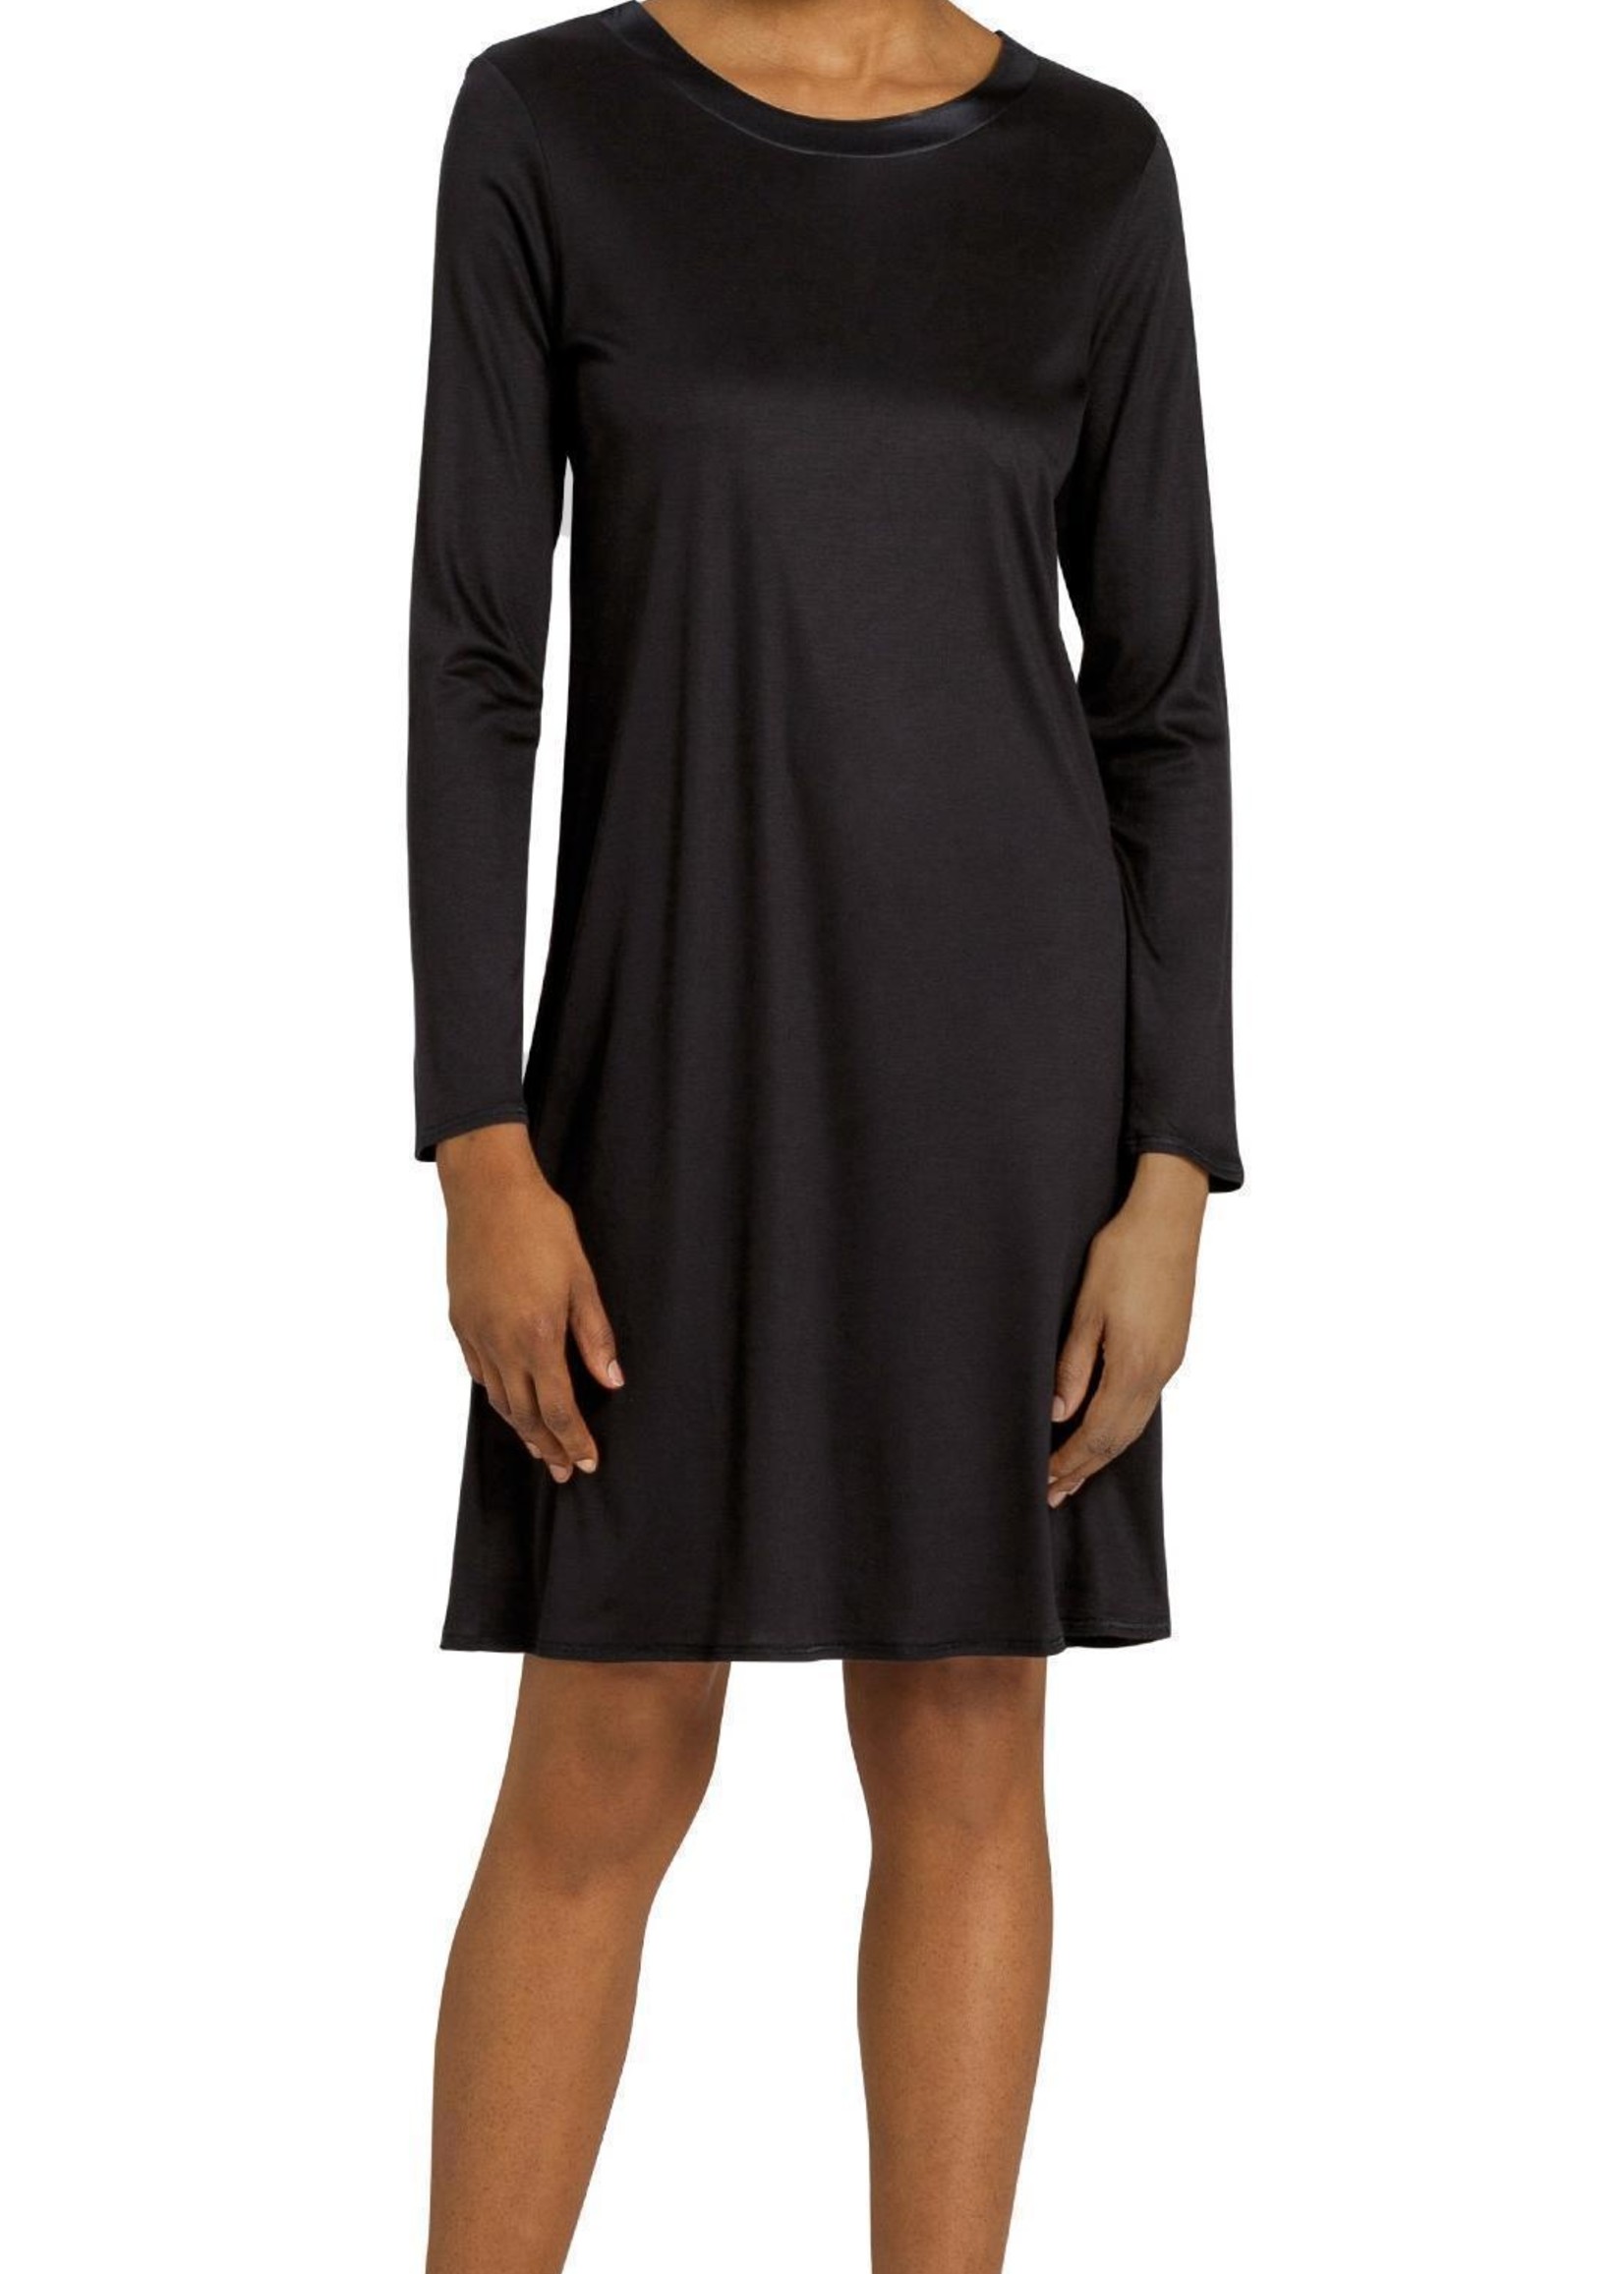 Hanro Grand Central Long Sleeve Nightgown